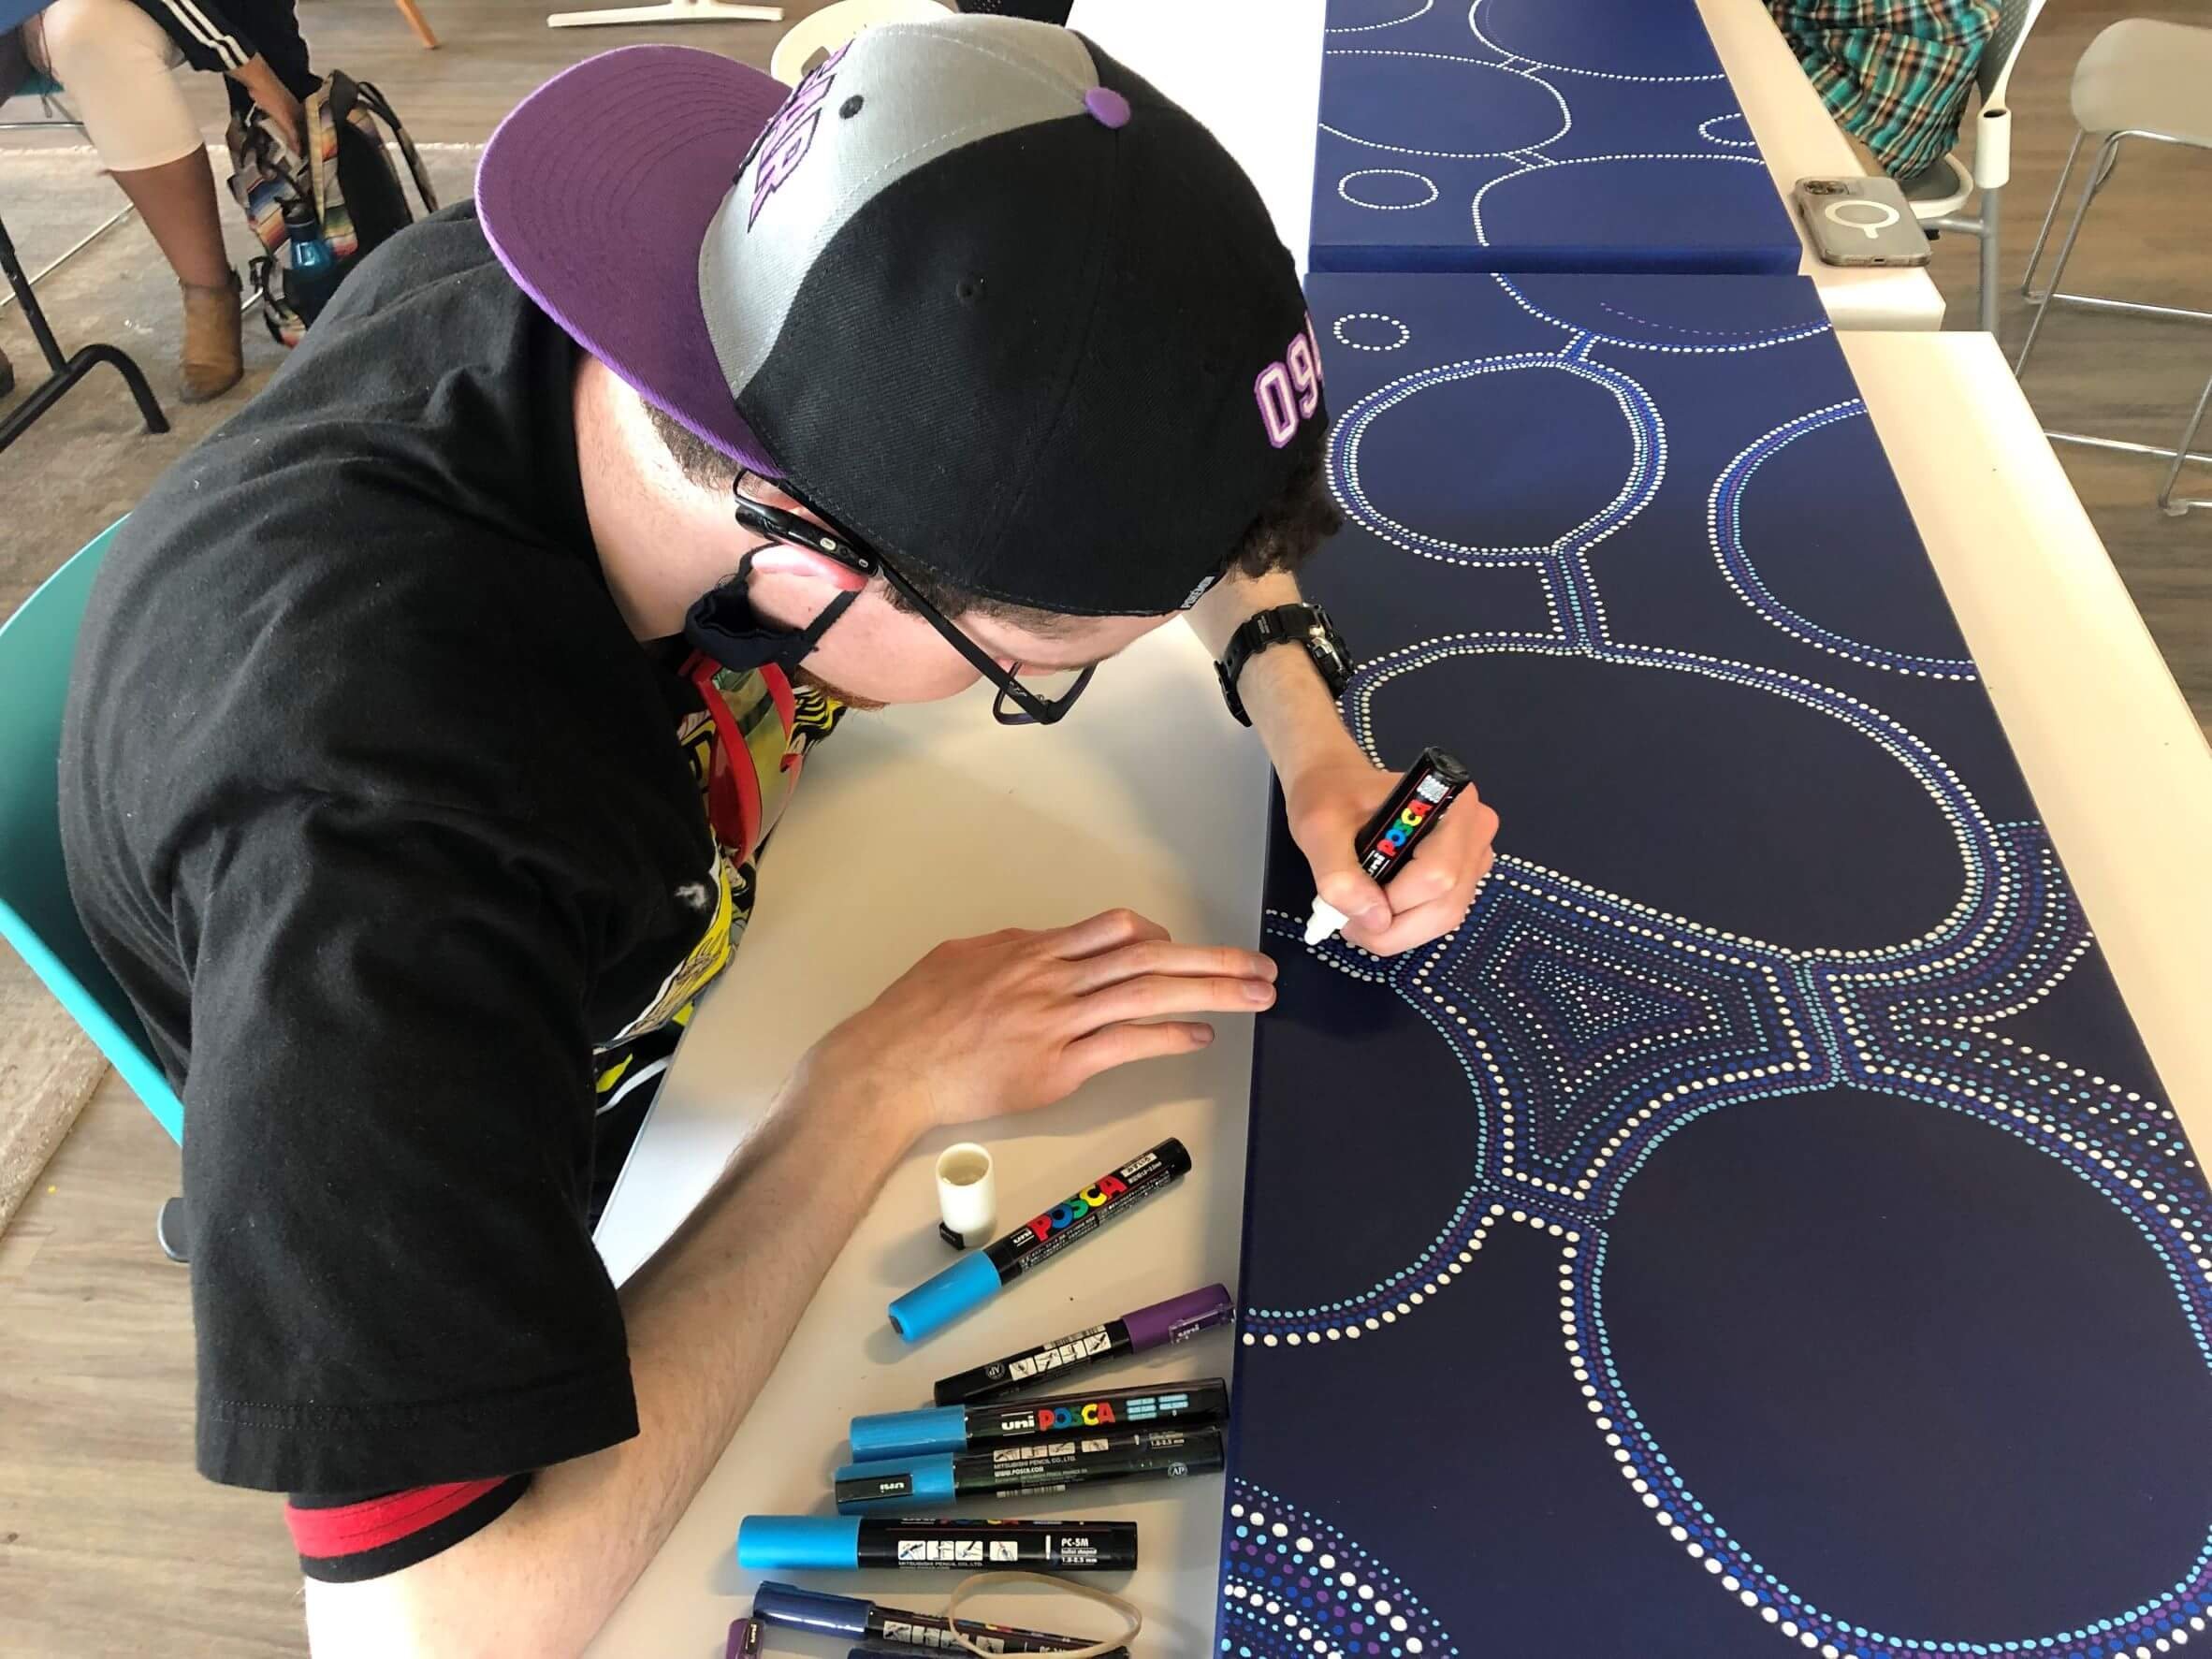 An artist at Access Gallery works on a piece using markers on paper